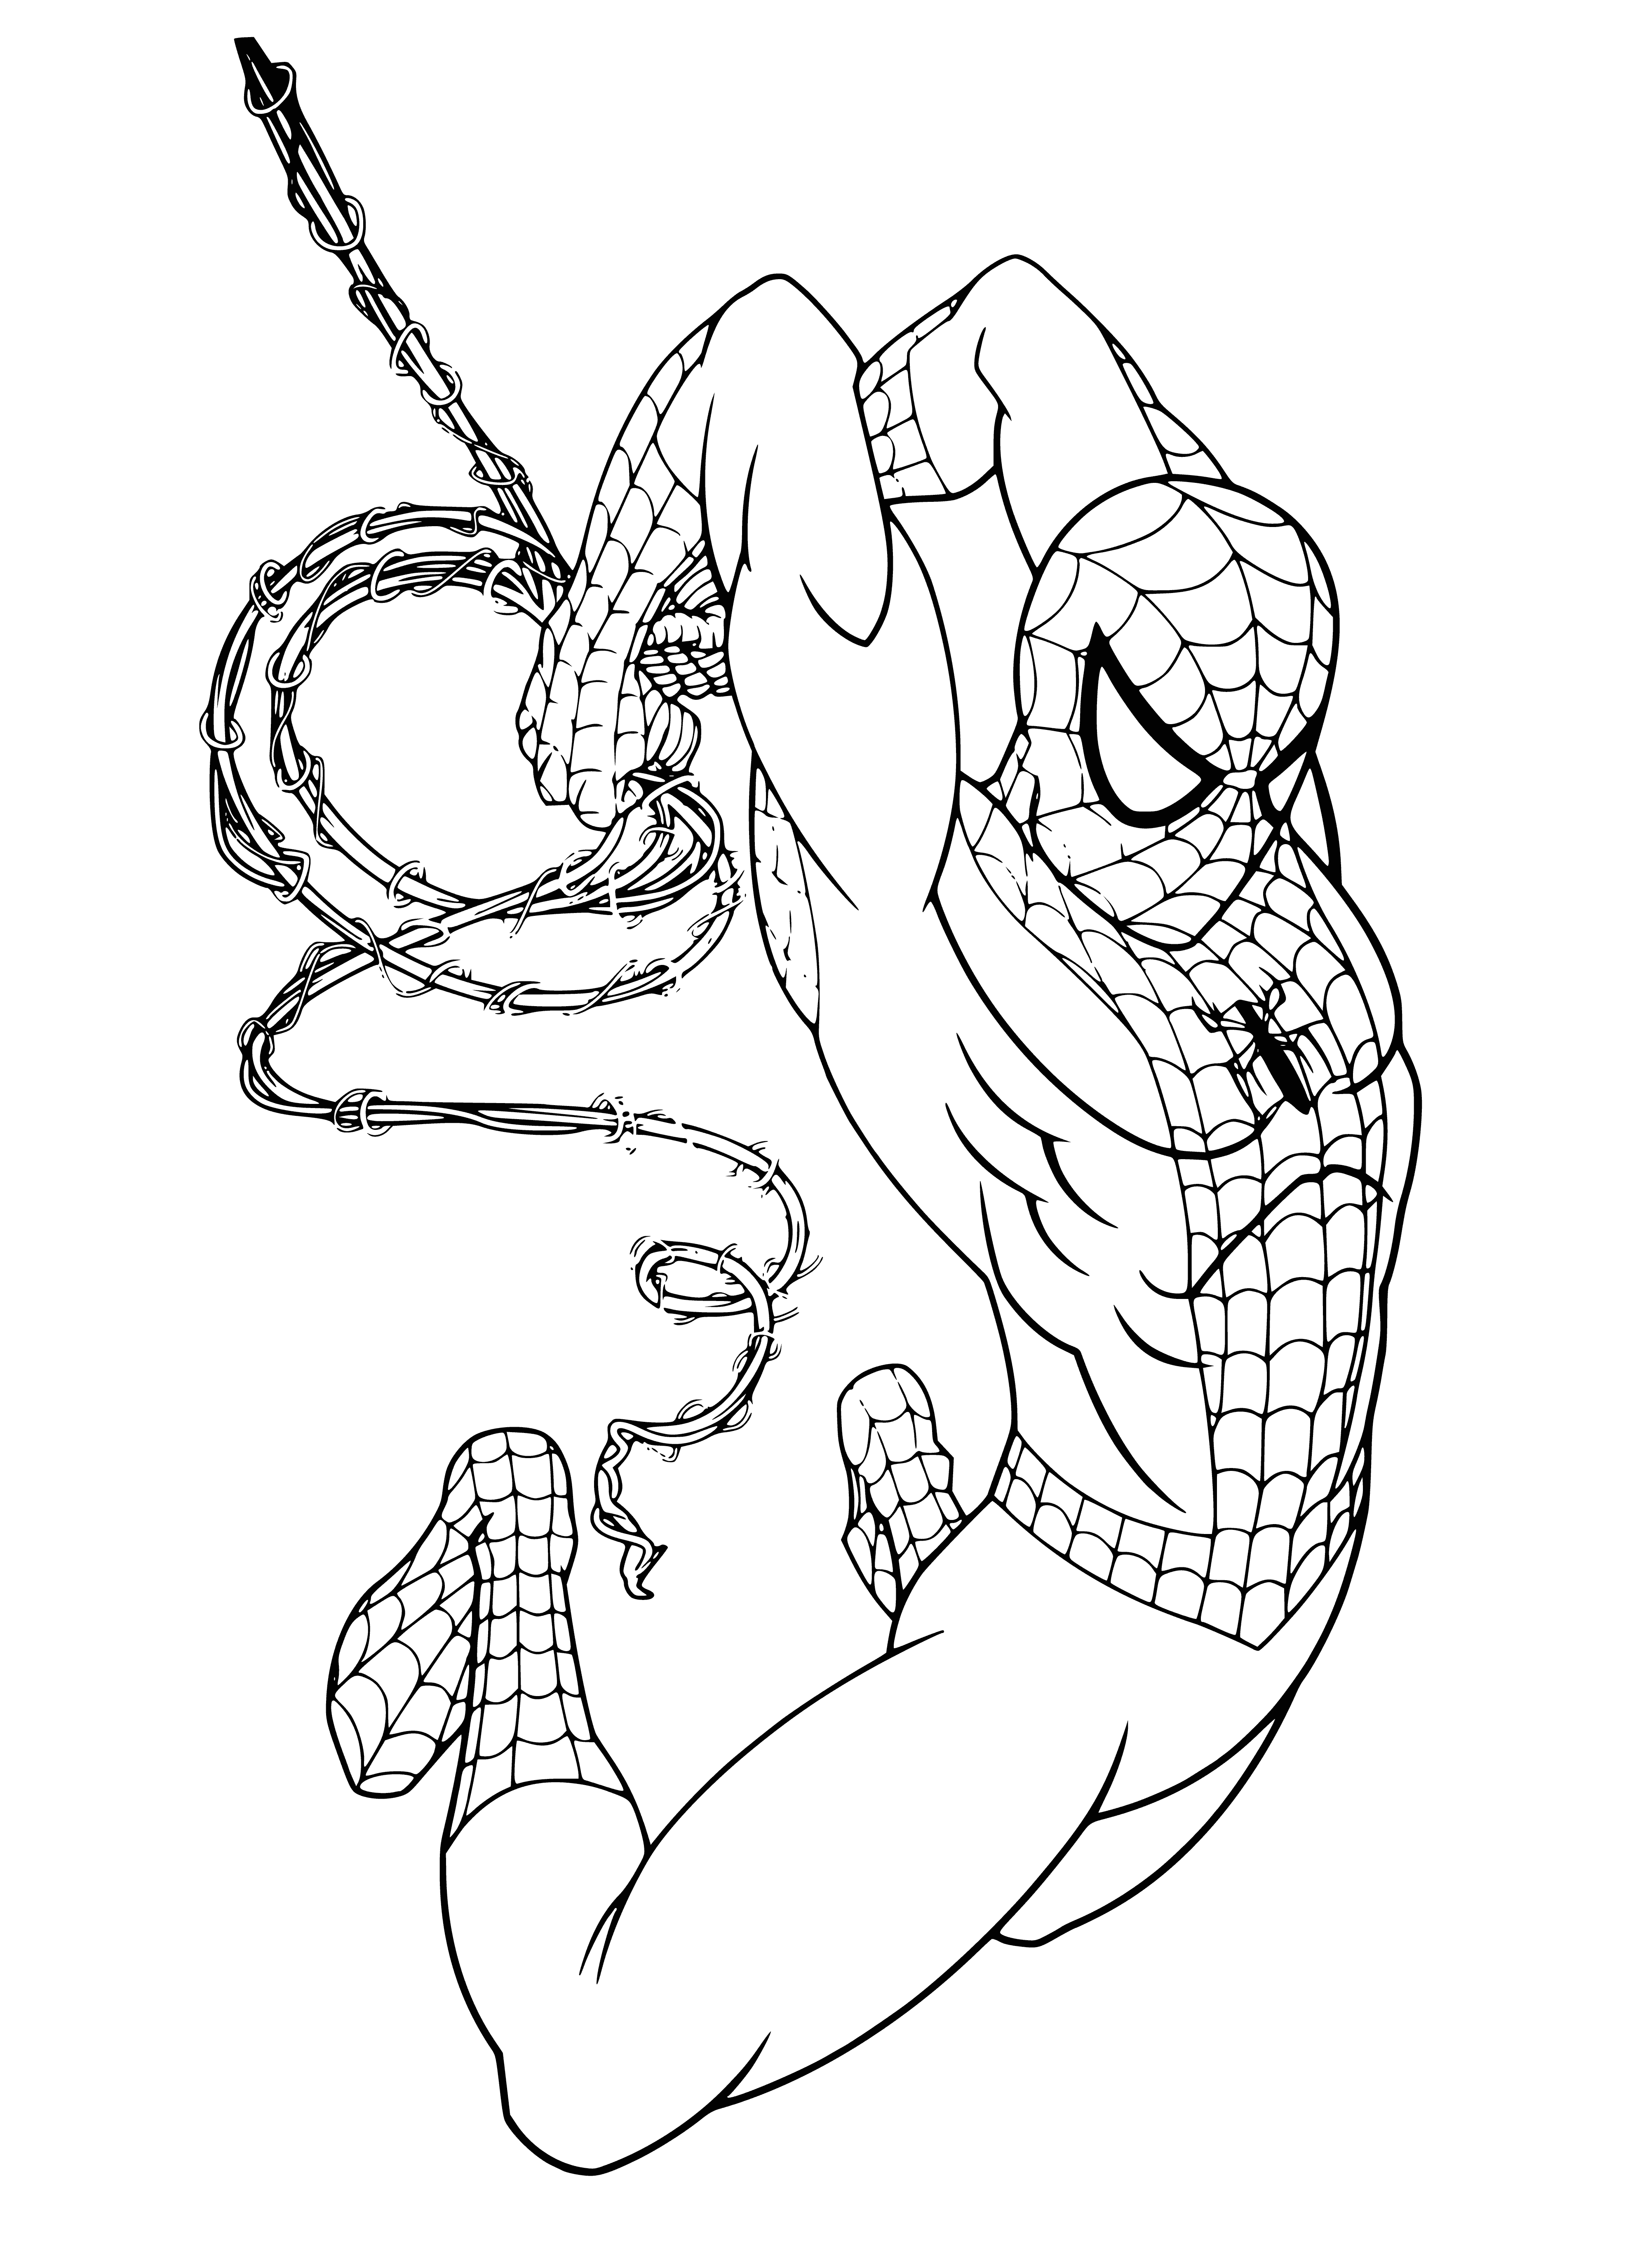 coloring page: Spiderman in a spider costume standing atop a wall, black spider on chest, red on back, red cape, black mask. #superhero